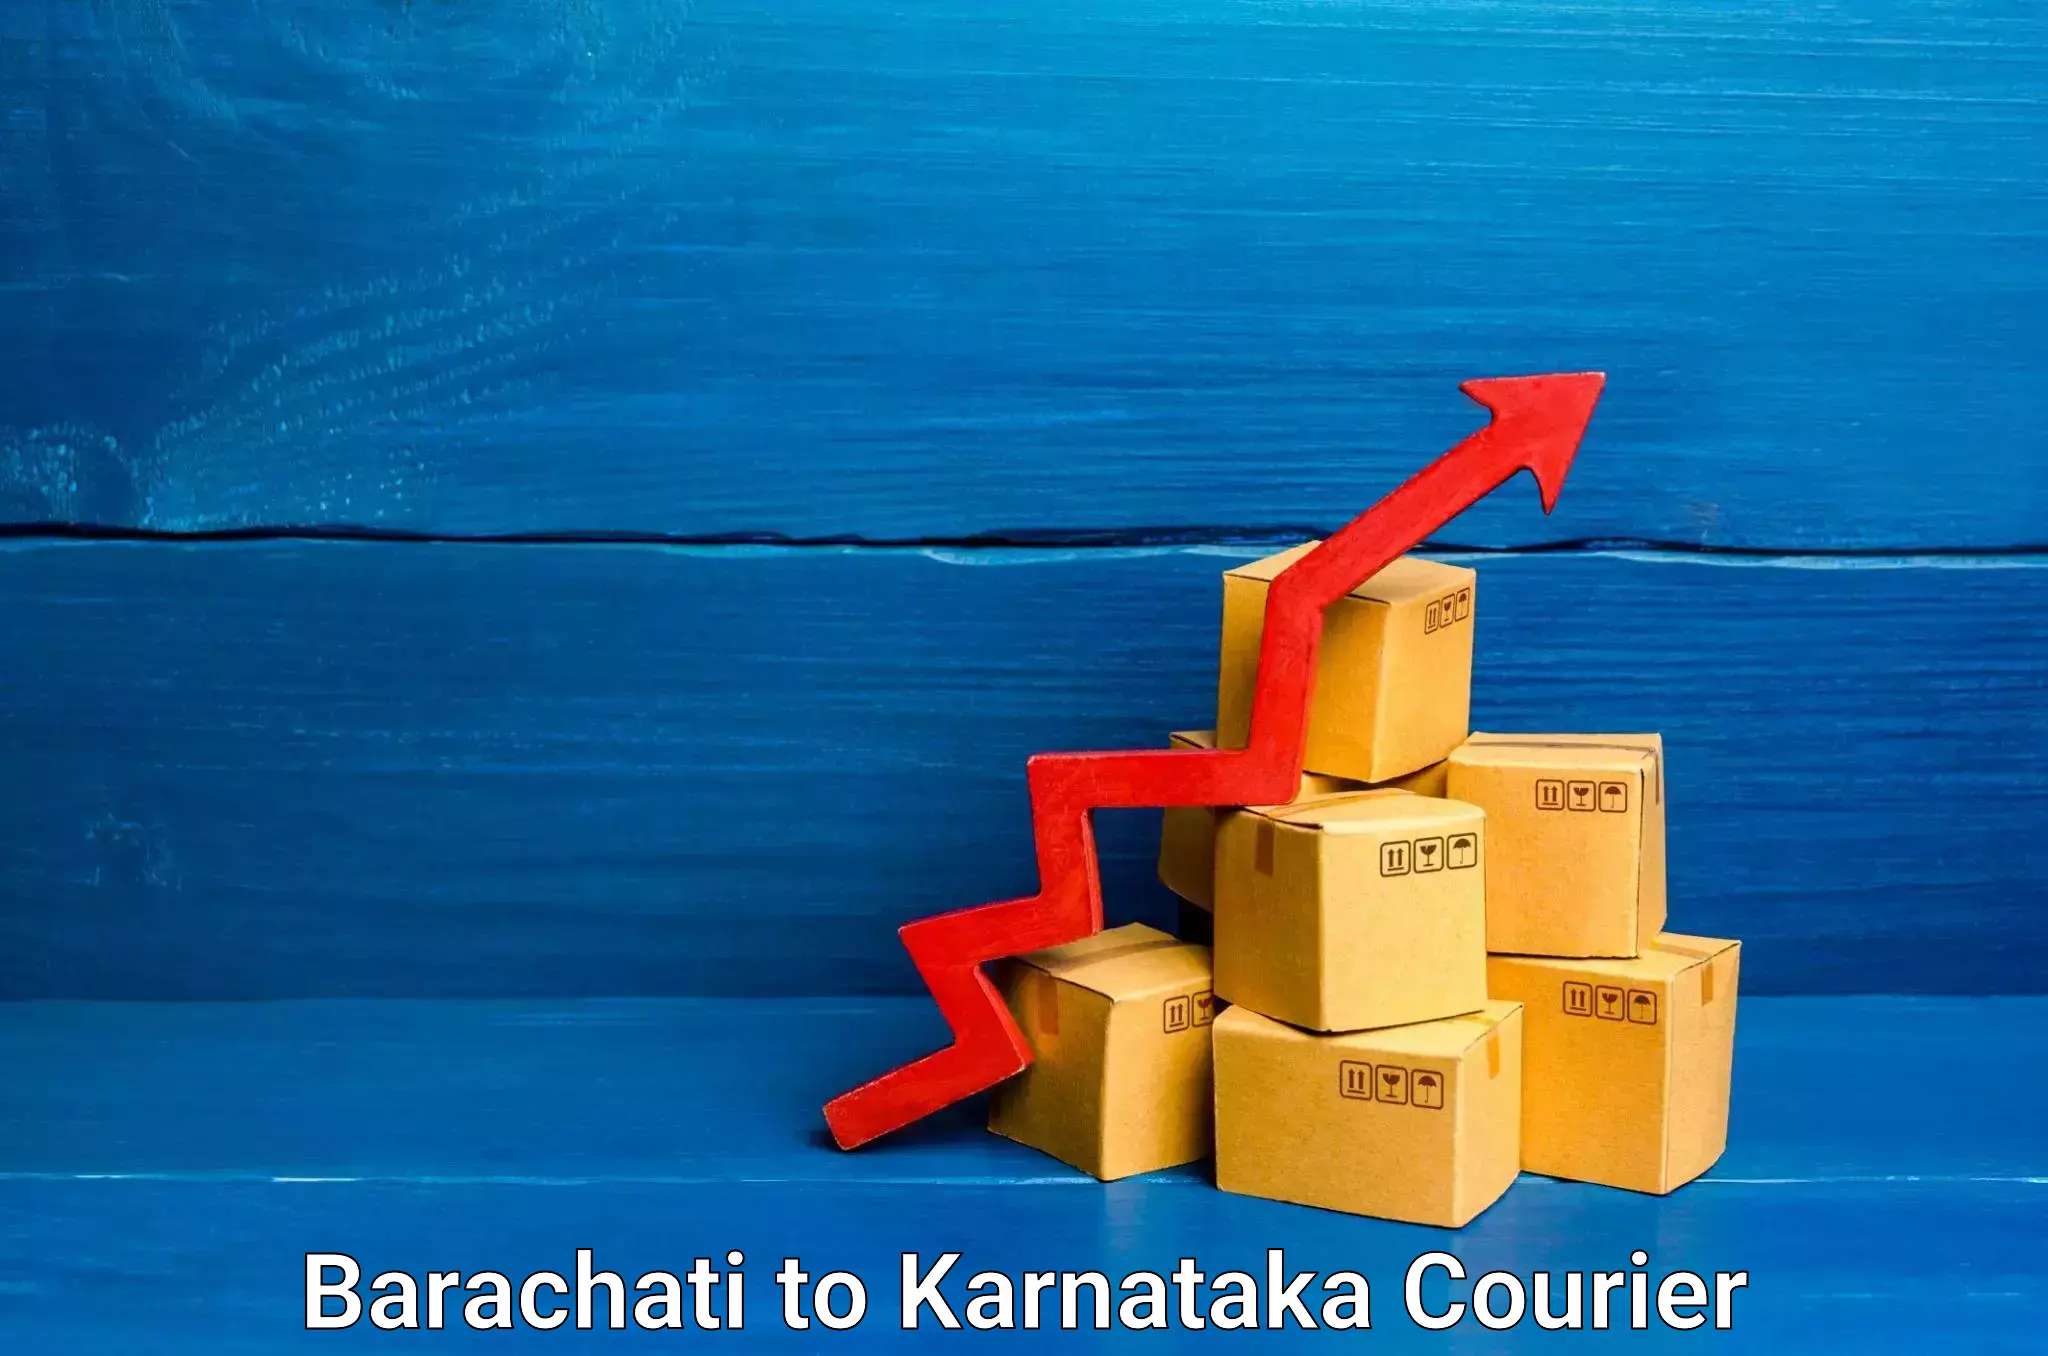 Furniture transport specialists Barachati to Manipal